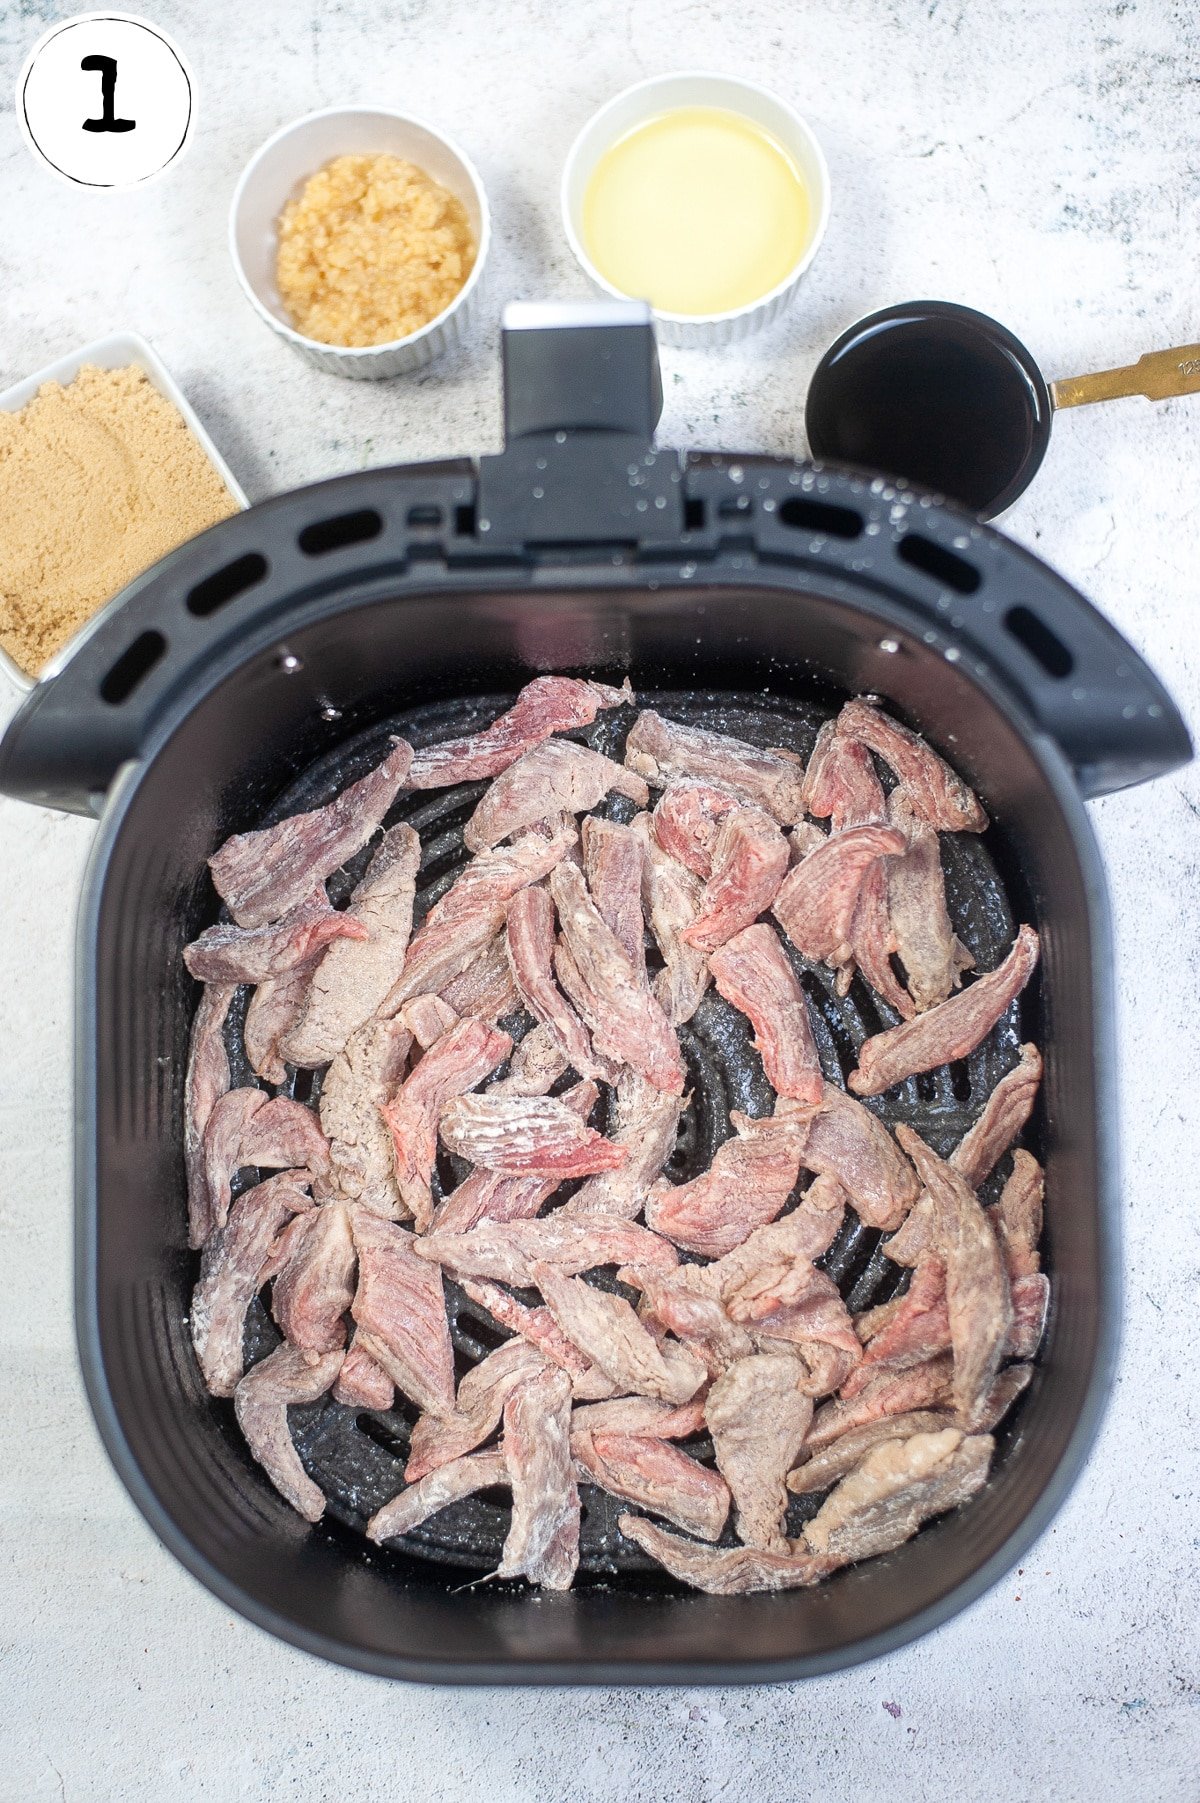 Flank steak coated with corn starch in air fryer basket.